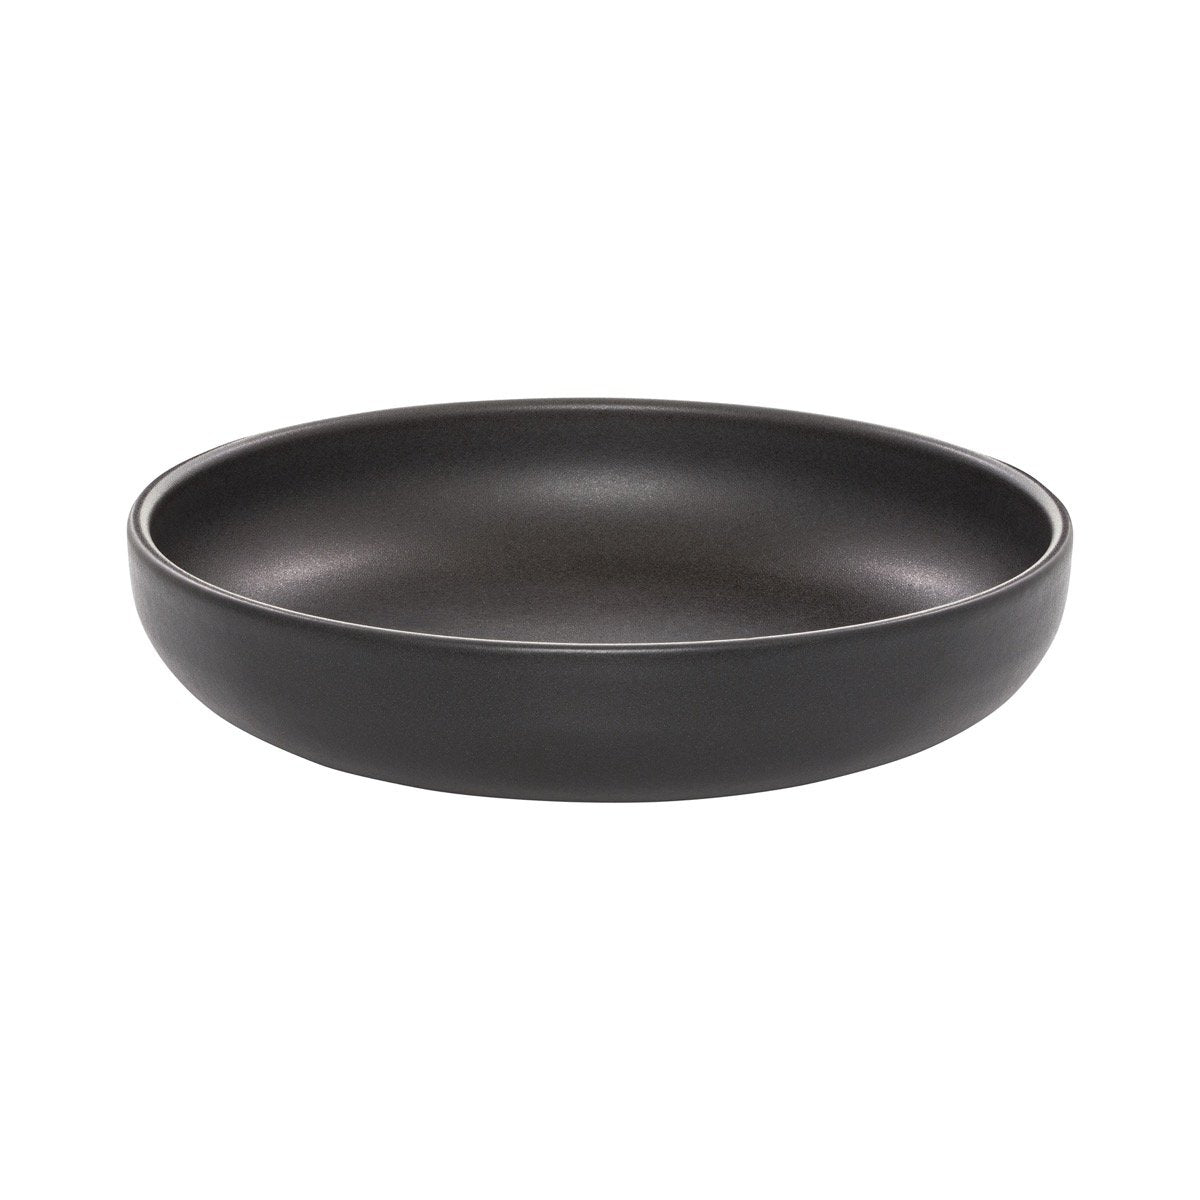 Round Bowl - 220Mm, Black from Eclipse. made out of Ceramic and sold in boxes of 6. Hospitality quality at wholesale price with The Flying Fork! 